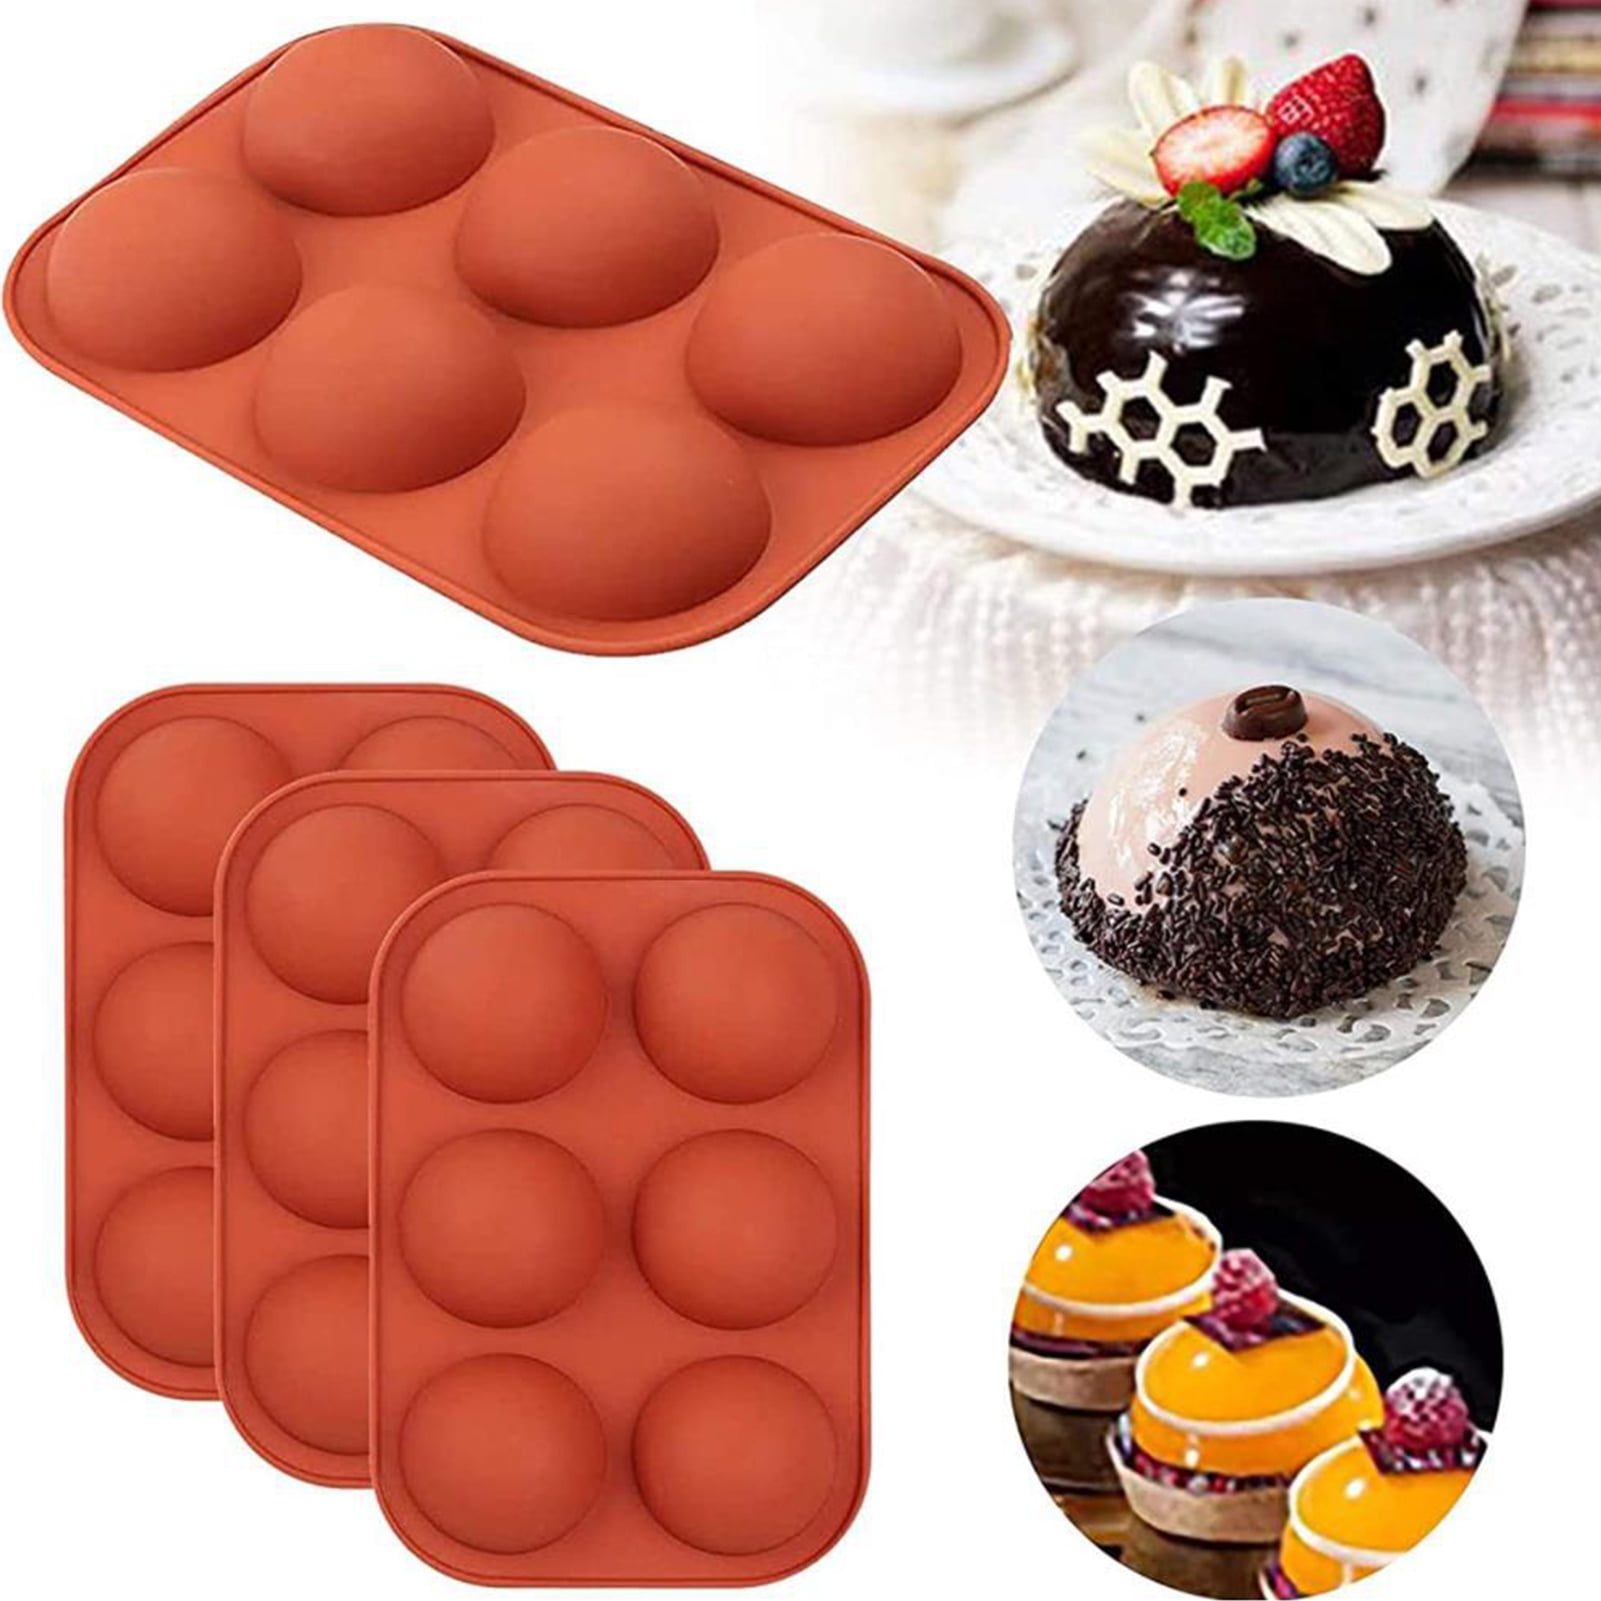 Fogun Silicone 9 Holes Concave Cake Ice Cream Chocolate Mold Soap 3D  Cupcake Bakeware Baking Dish Cake Pan Muffin Mould Baking Molds Silicone  Shapes